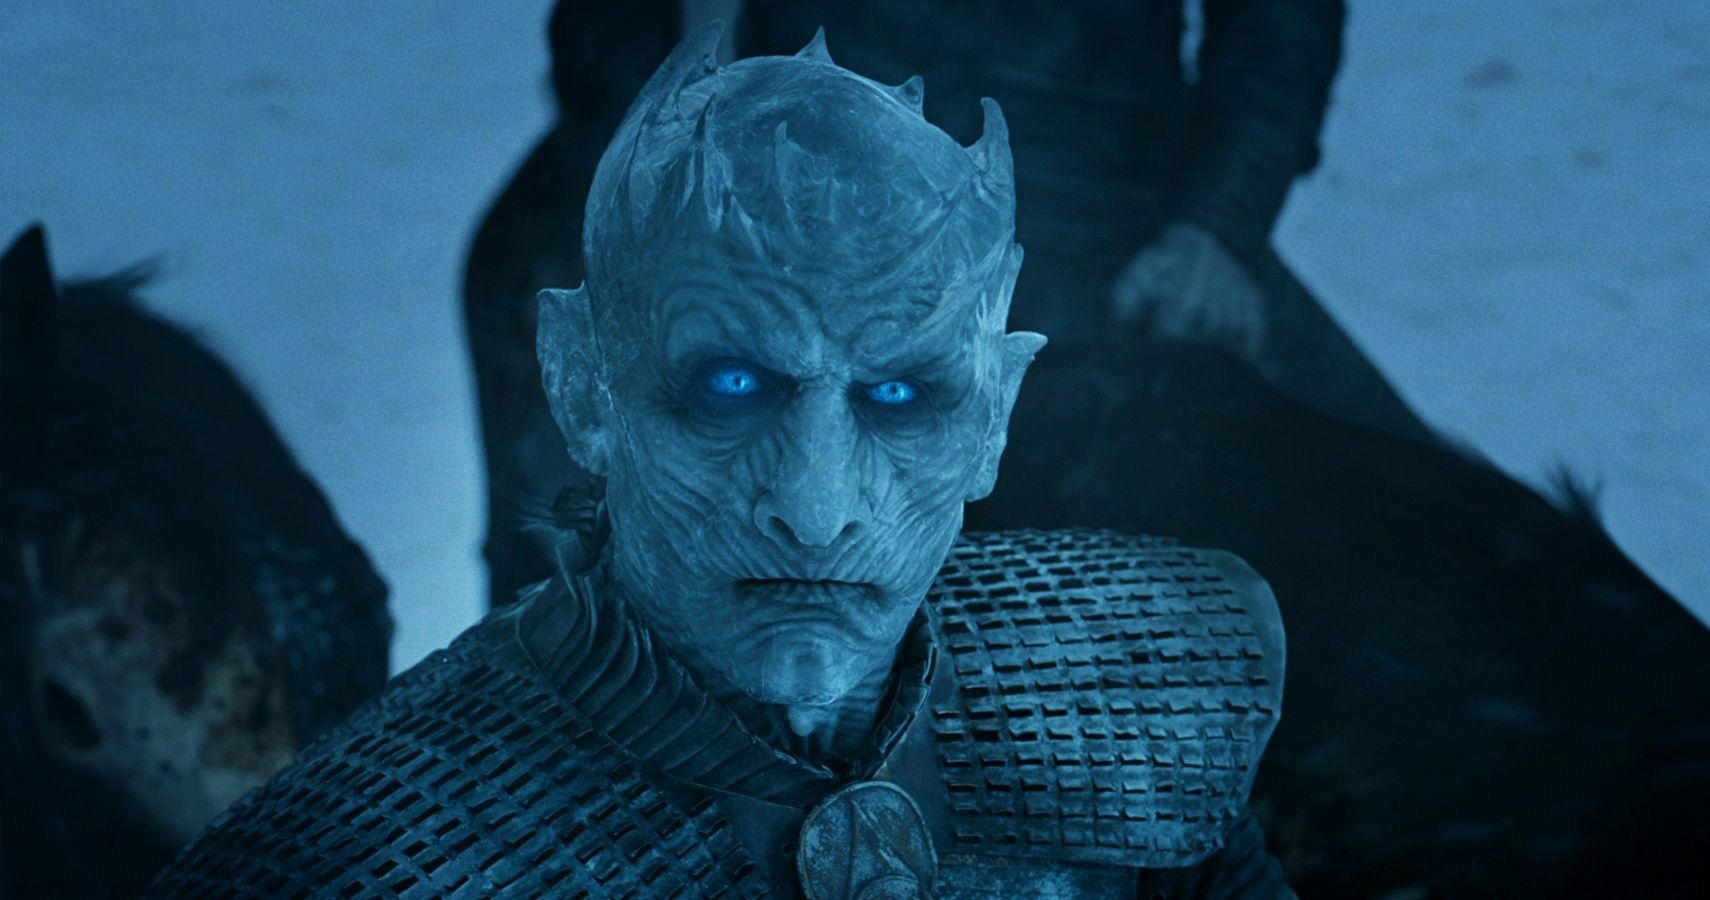 Game of Thrones 10 Unanswered Questions We Still Have About The White Walkers